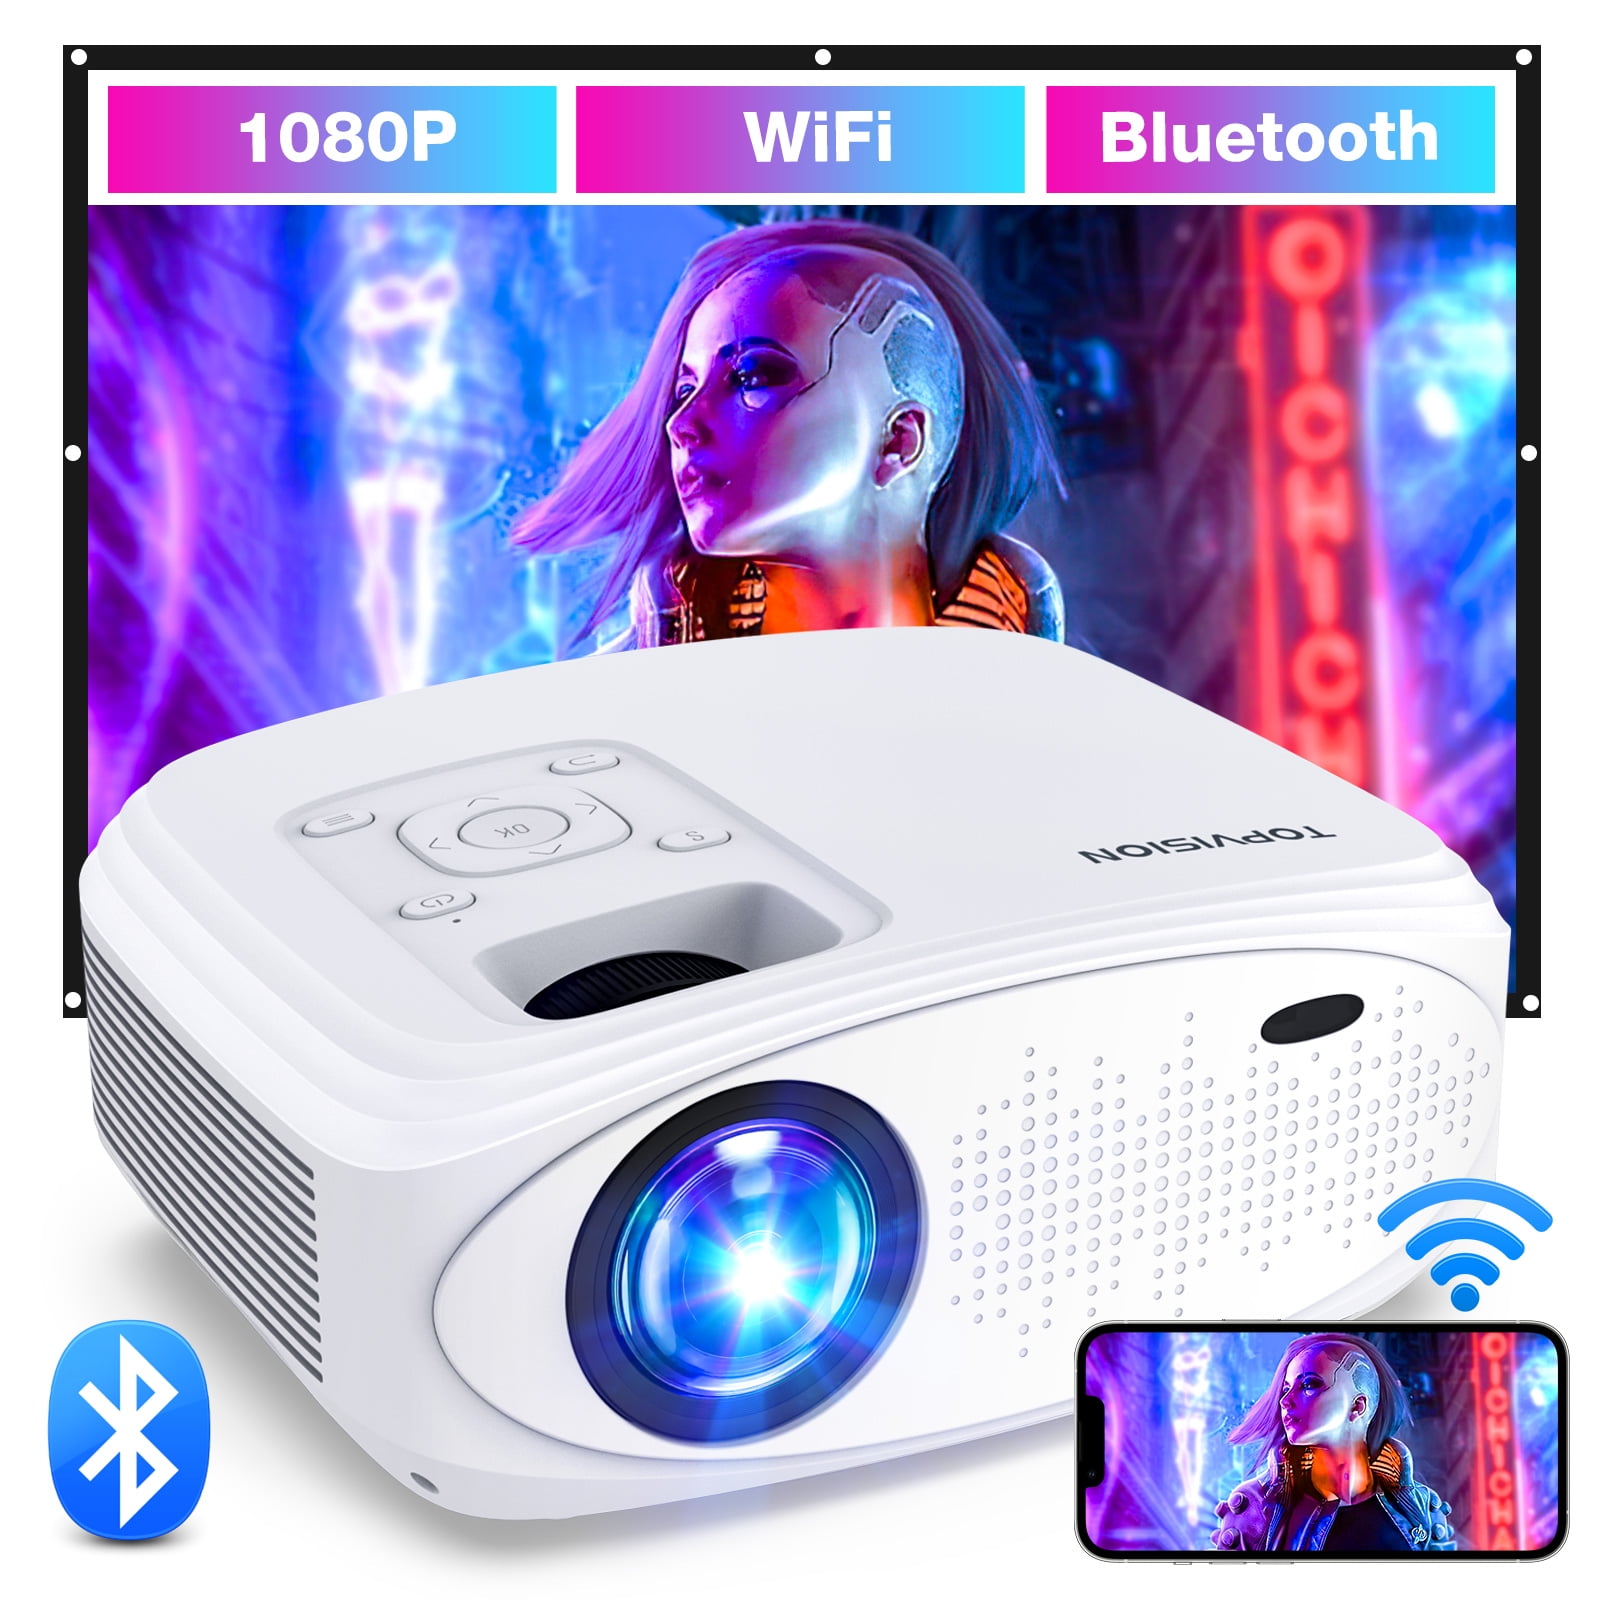 USB Wi-Fi Projector Full HD 1080P Projector and 240 Display Supported VGA HDMI AV TF PS4 Compatible with TV Stick TOPVISION 5500L Mini Projector with Synchronize Smart Phone Screen 